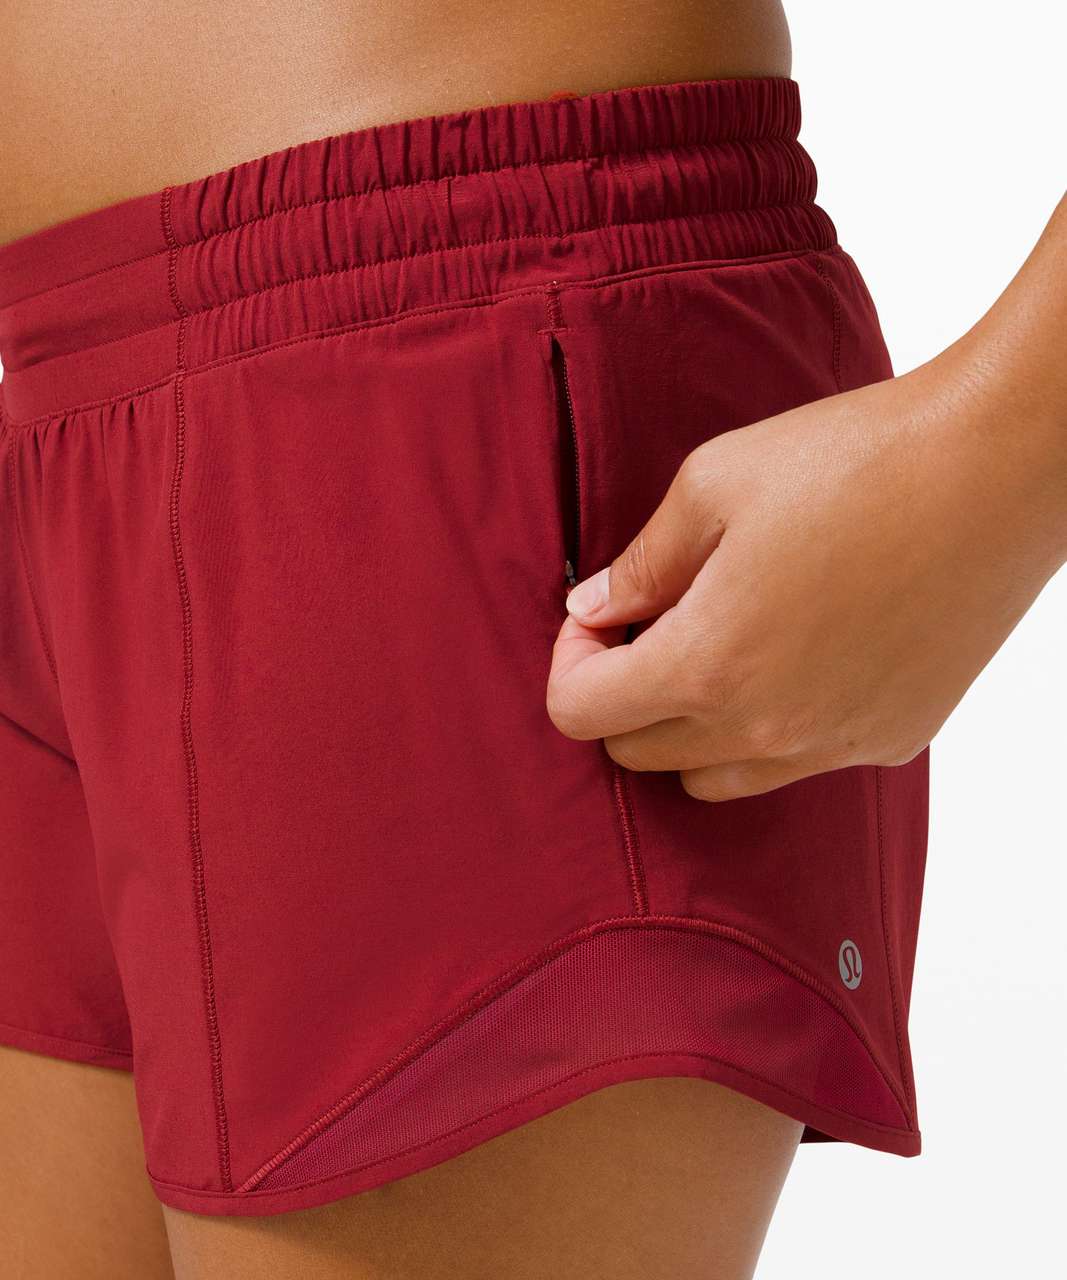 Lululemon Hotty Hot Low-Rise Lined Short 4" - Prep Red